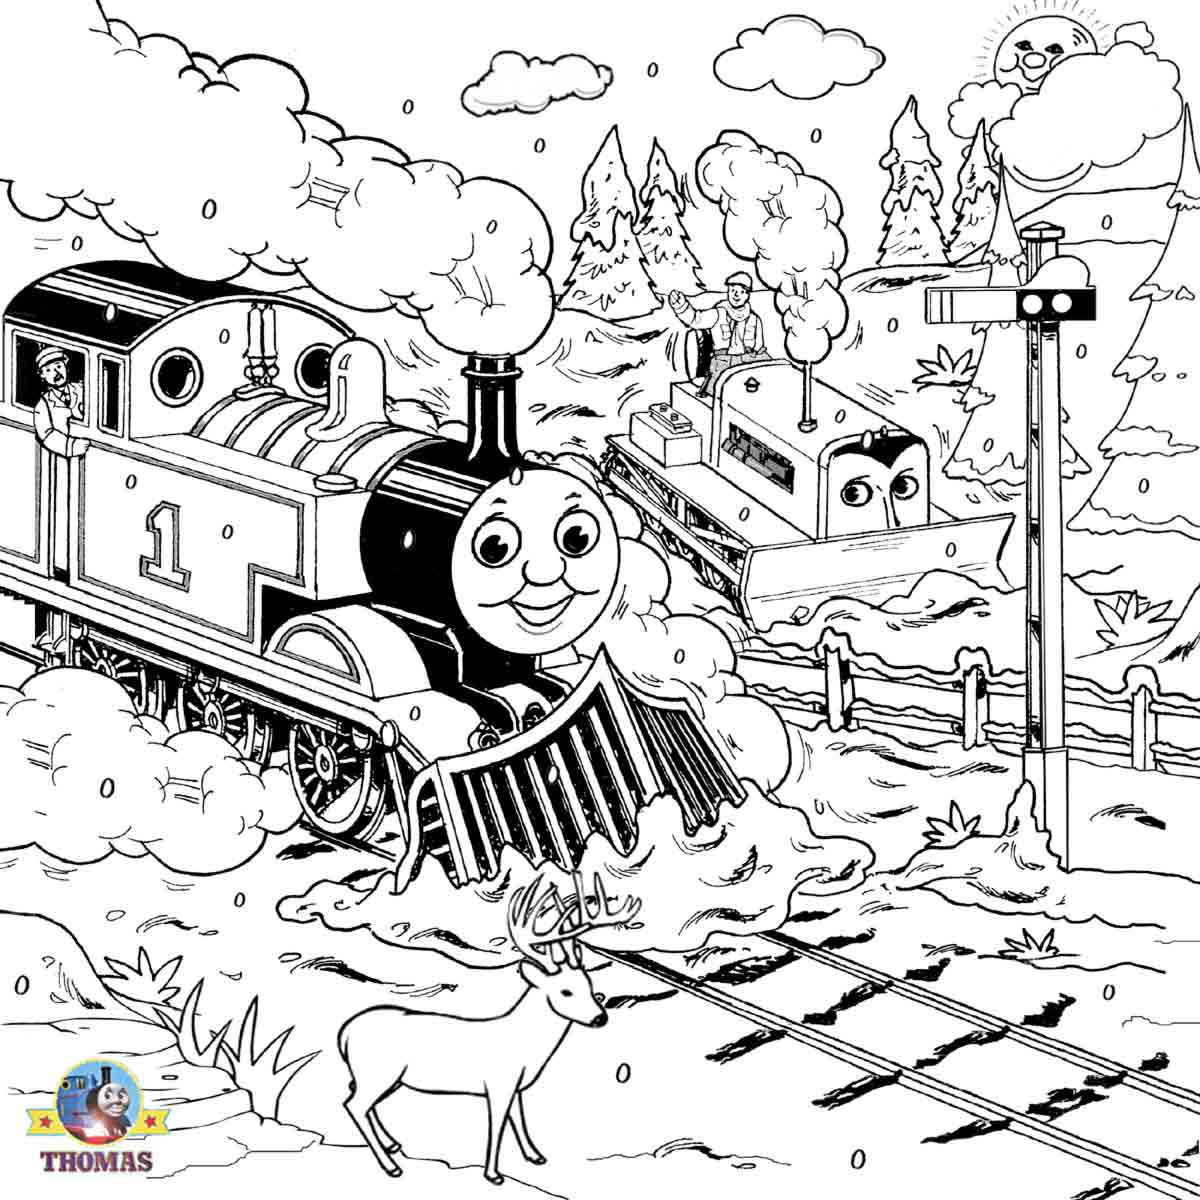 Old track Thomas tank the train coloring steam engine railway work pictures to color colouring pages